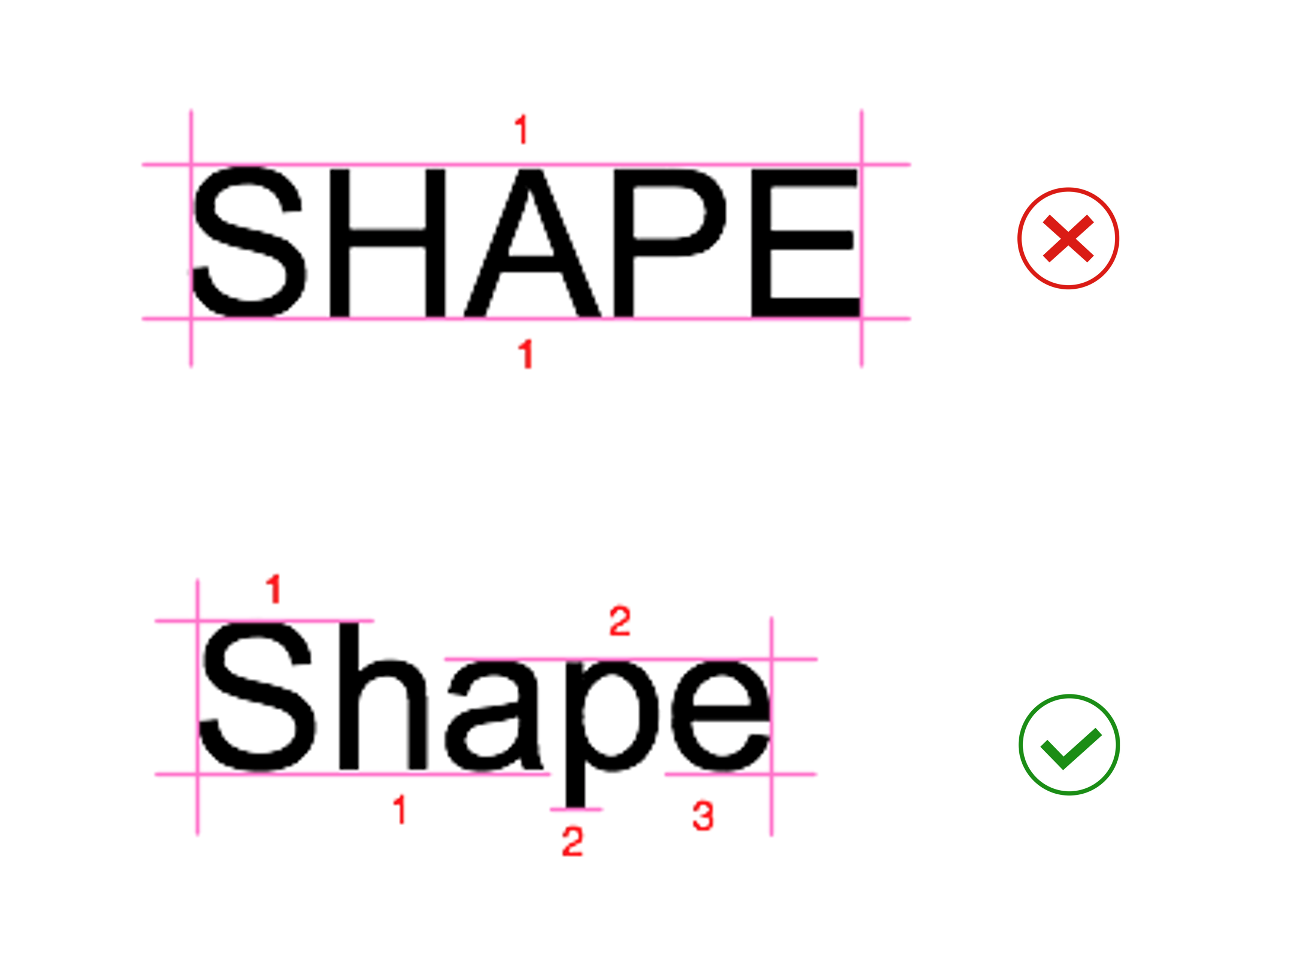 The word shape is show in ALL CAPS text and Sentence Case text. Red lines are used to highlight the shapes of the words created by the different letter heights. The word in ALL CAPS is a uniform rectangle shape which may make it more difficult to read. The word in Sentence Case has a unique shape with varied letter heights, making is easier to read.